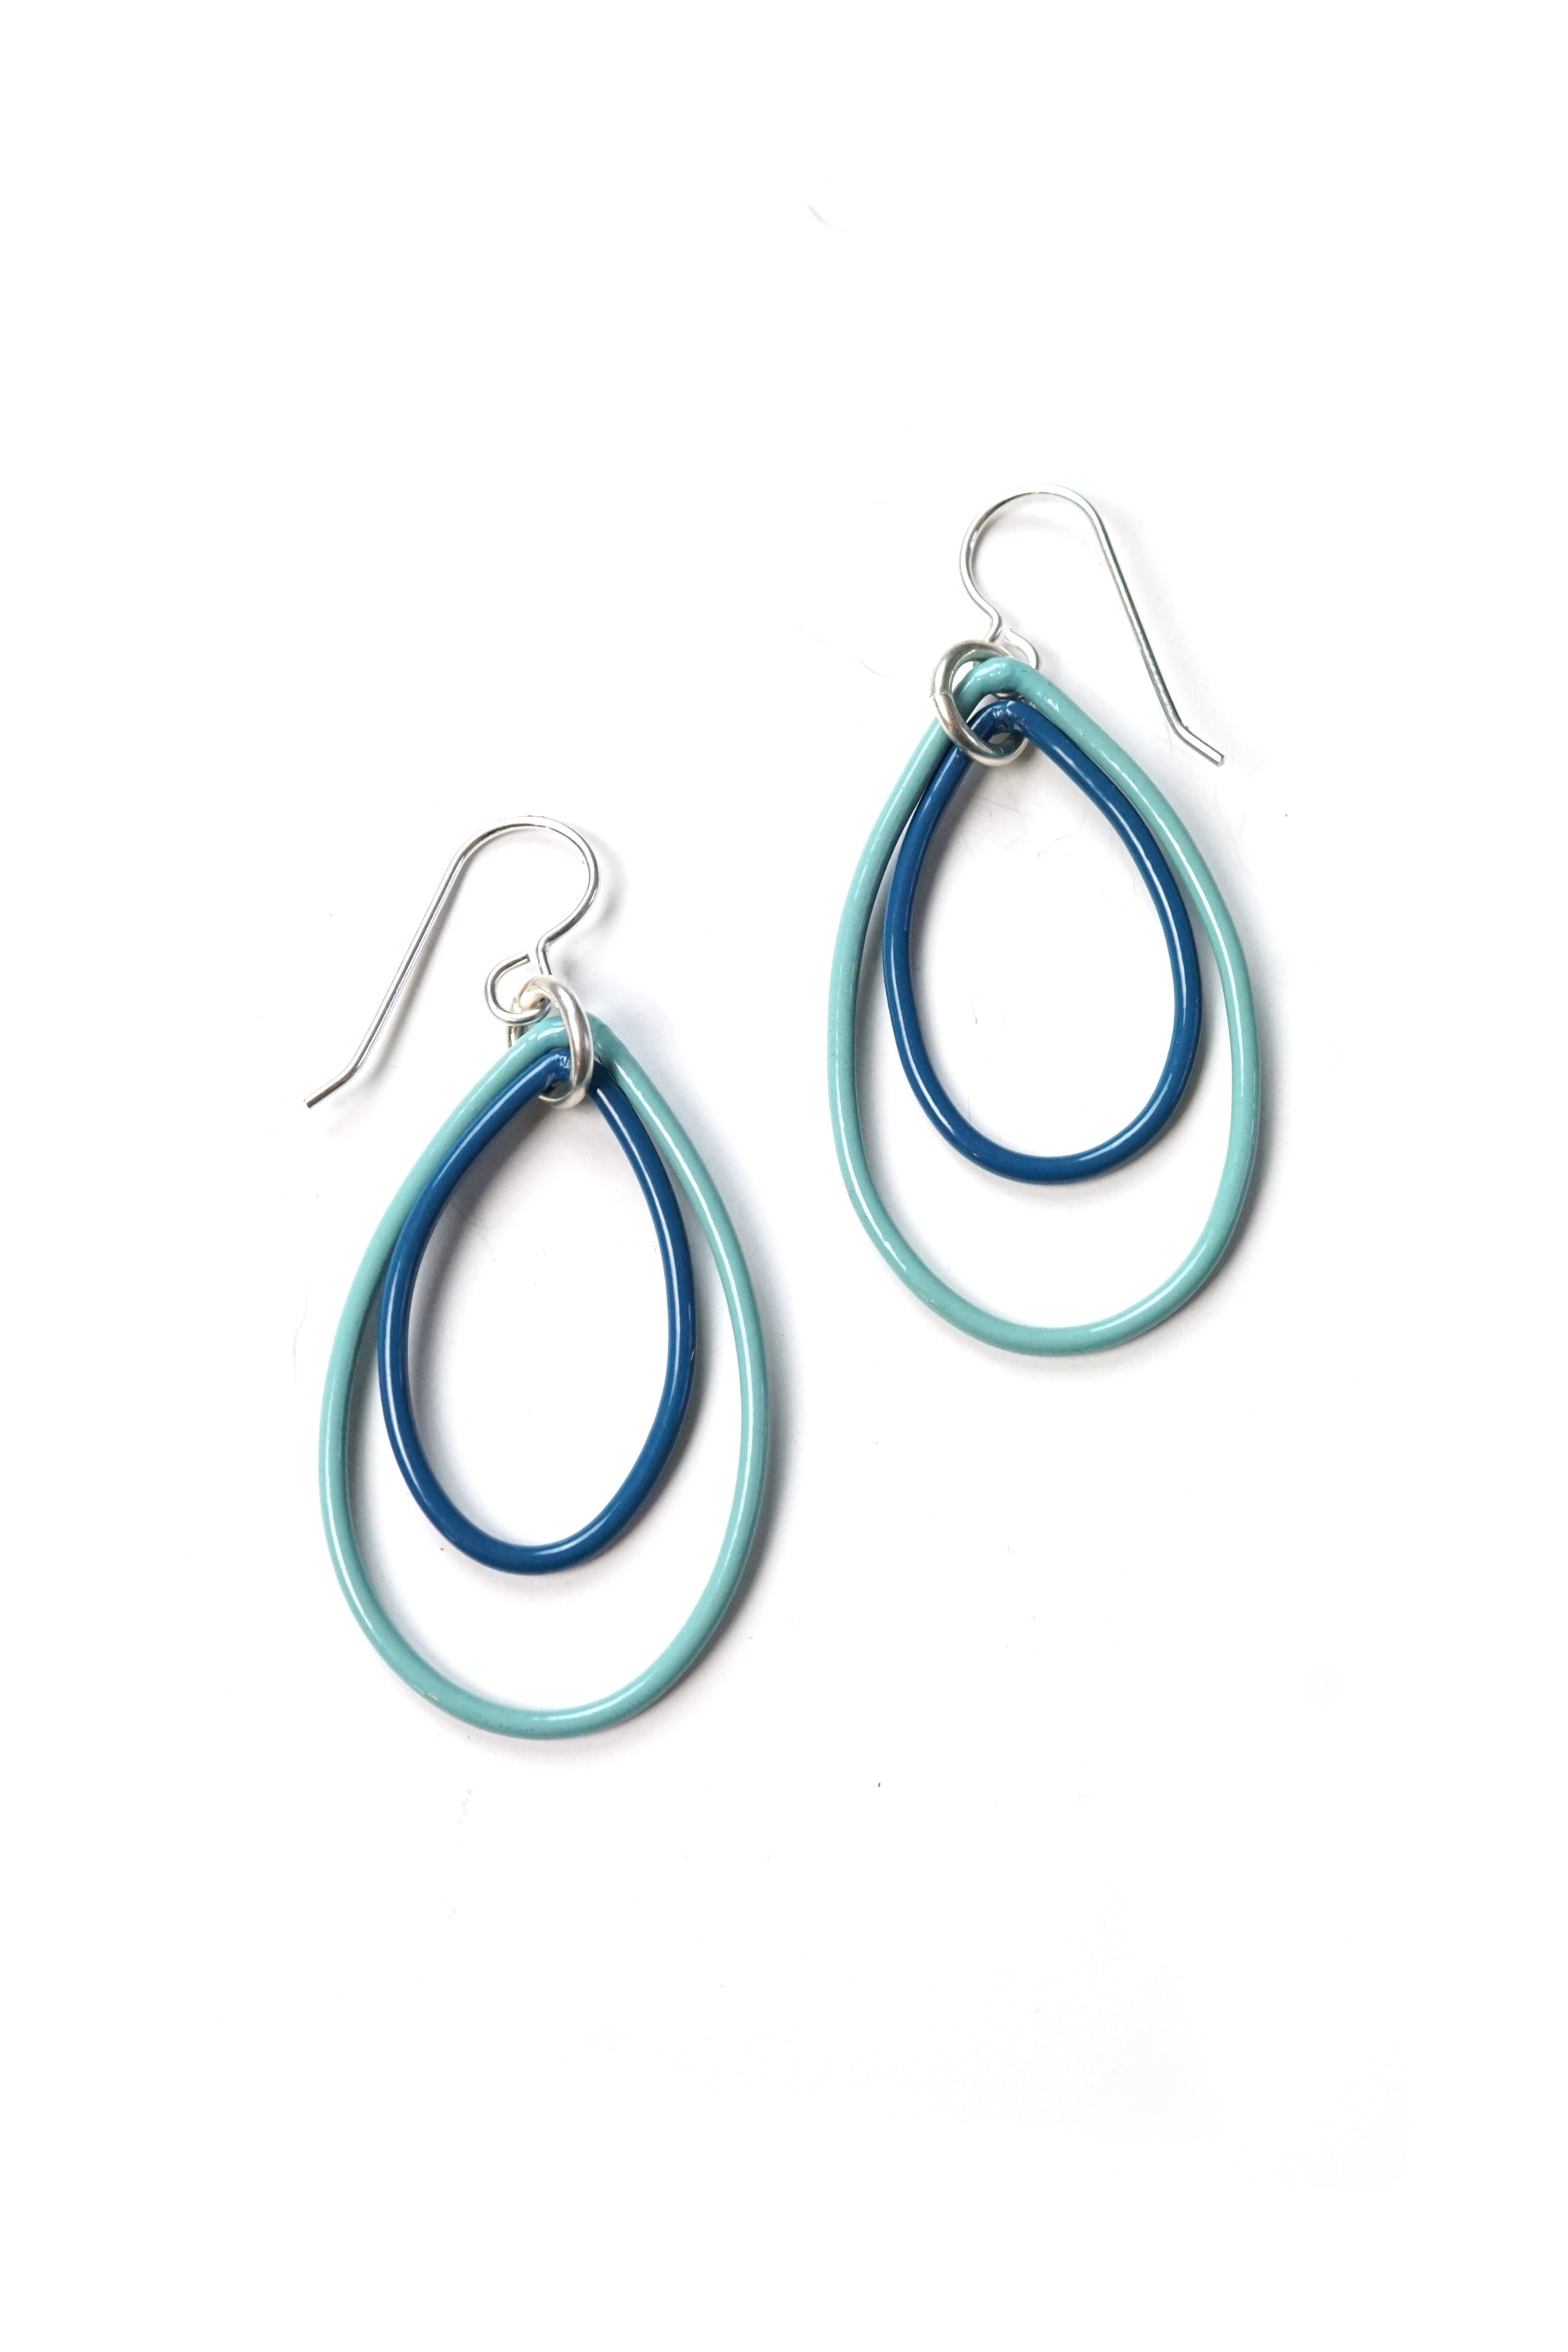 Ella earrings in Faded Teal and Azure Blue